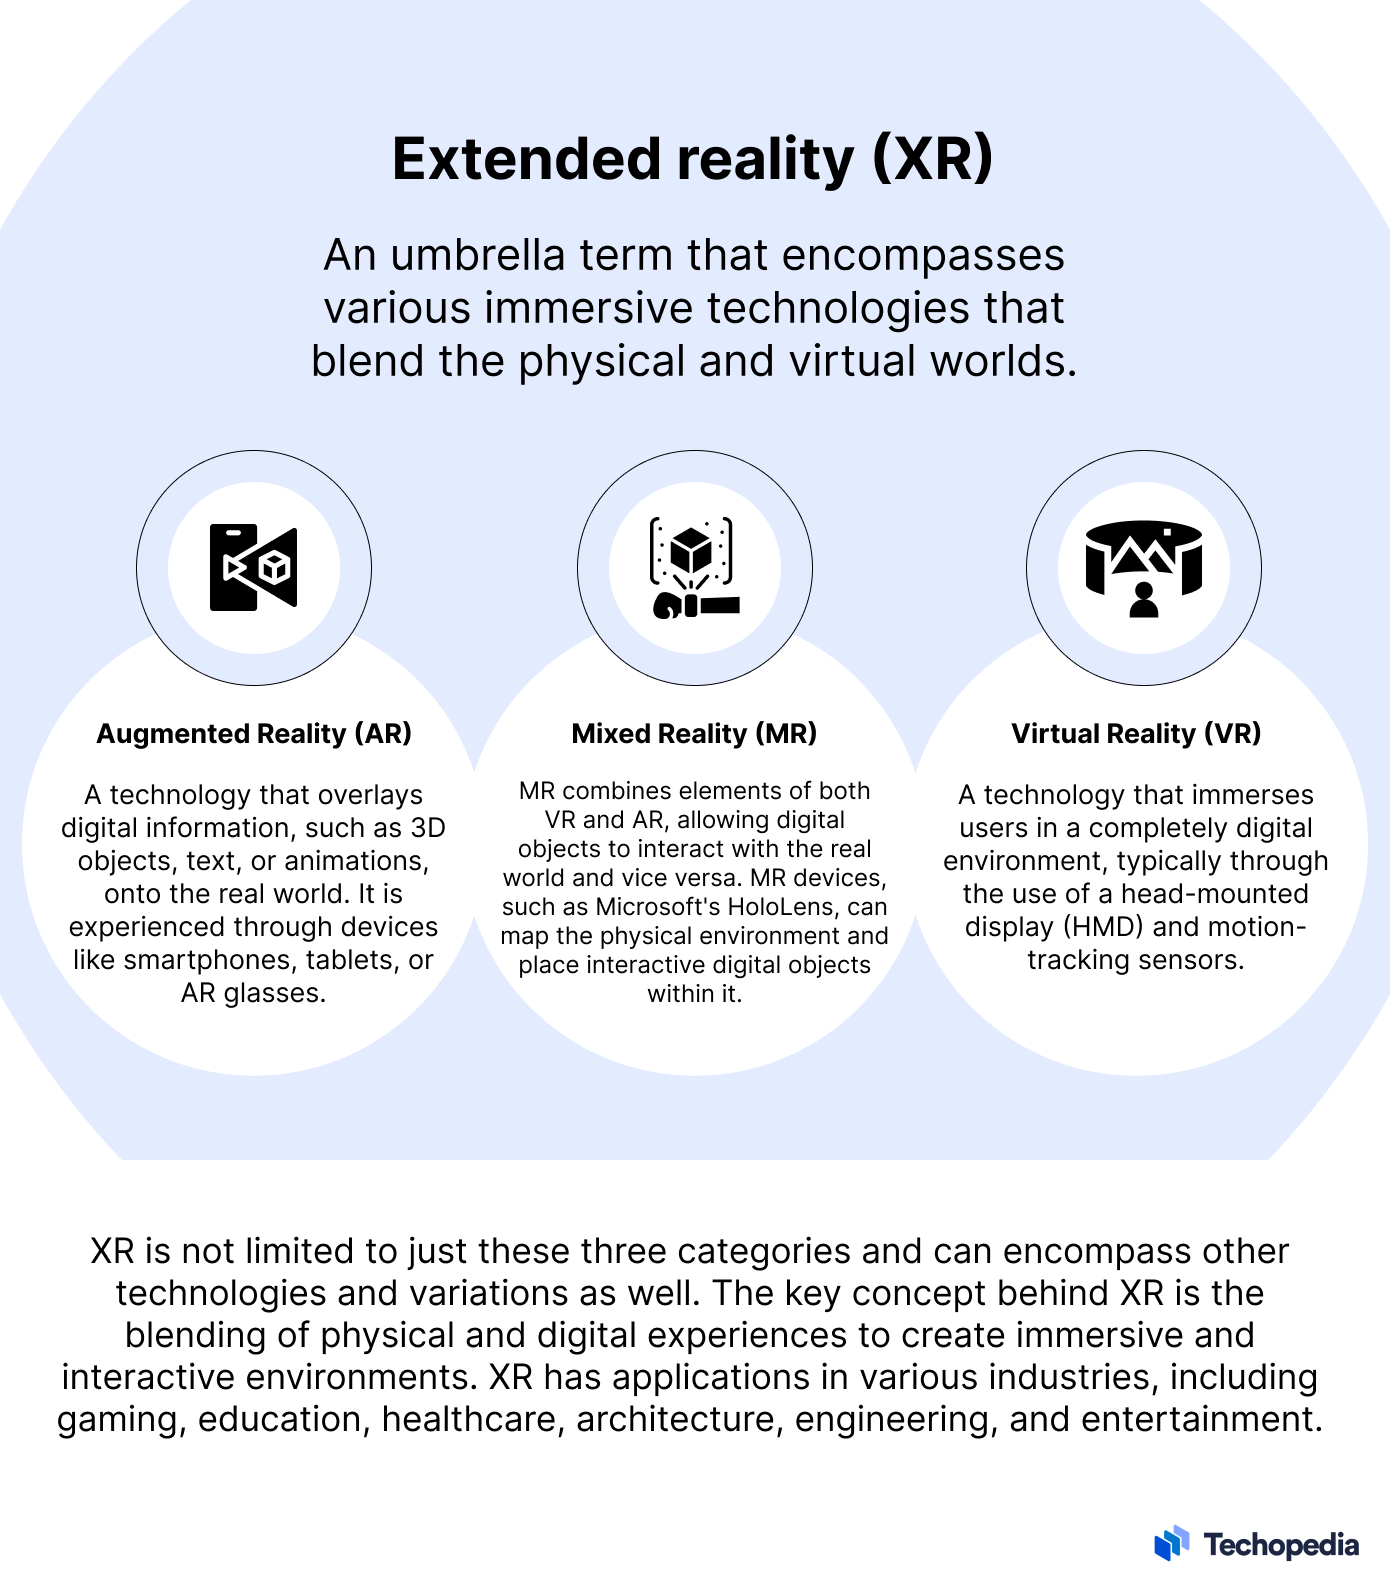 Extended Reality (XR) Explained